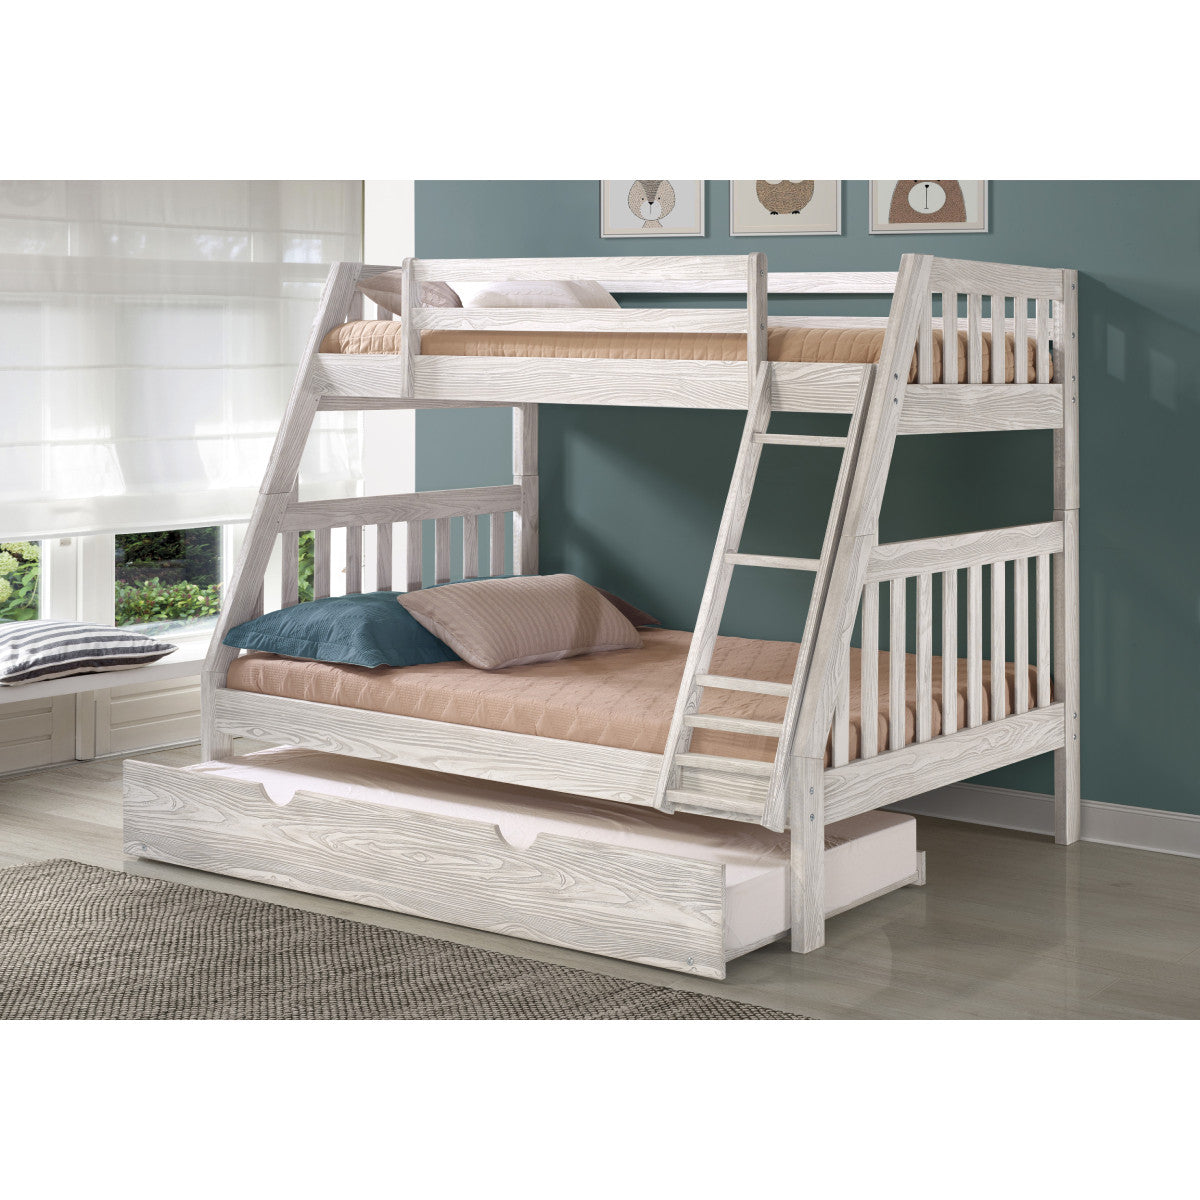 TWIN/FULL BUNK BED EMBOSSED IN ICE GREY FINISH W/TWIN TRUNDLE BED